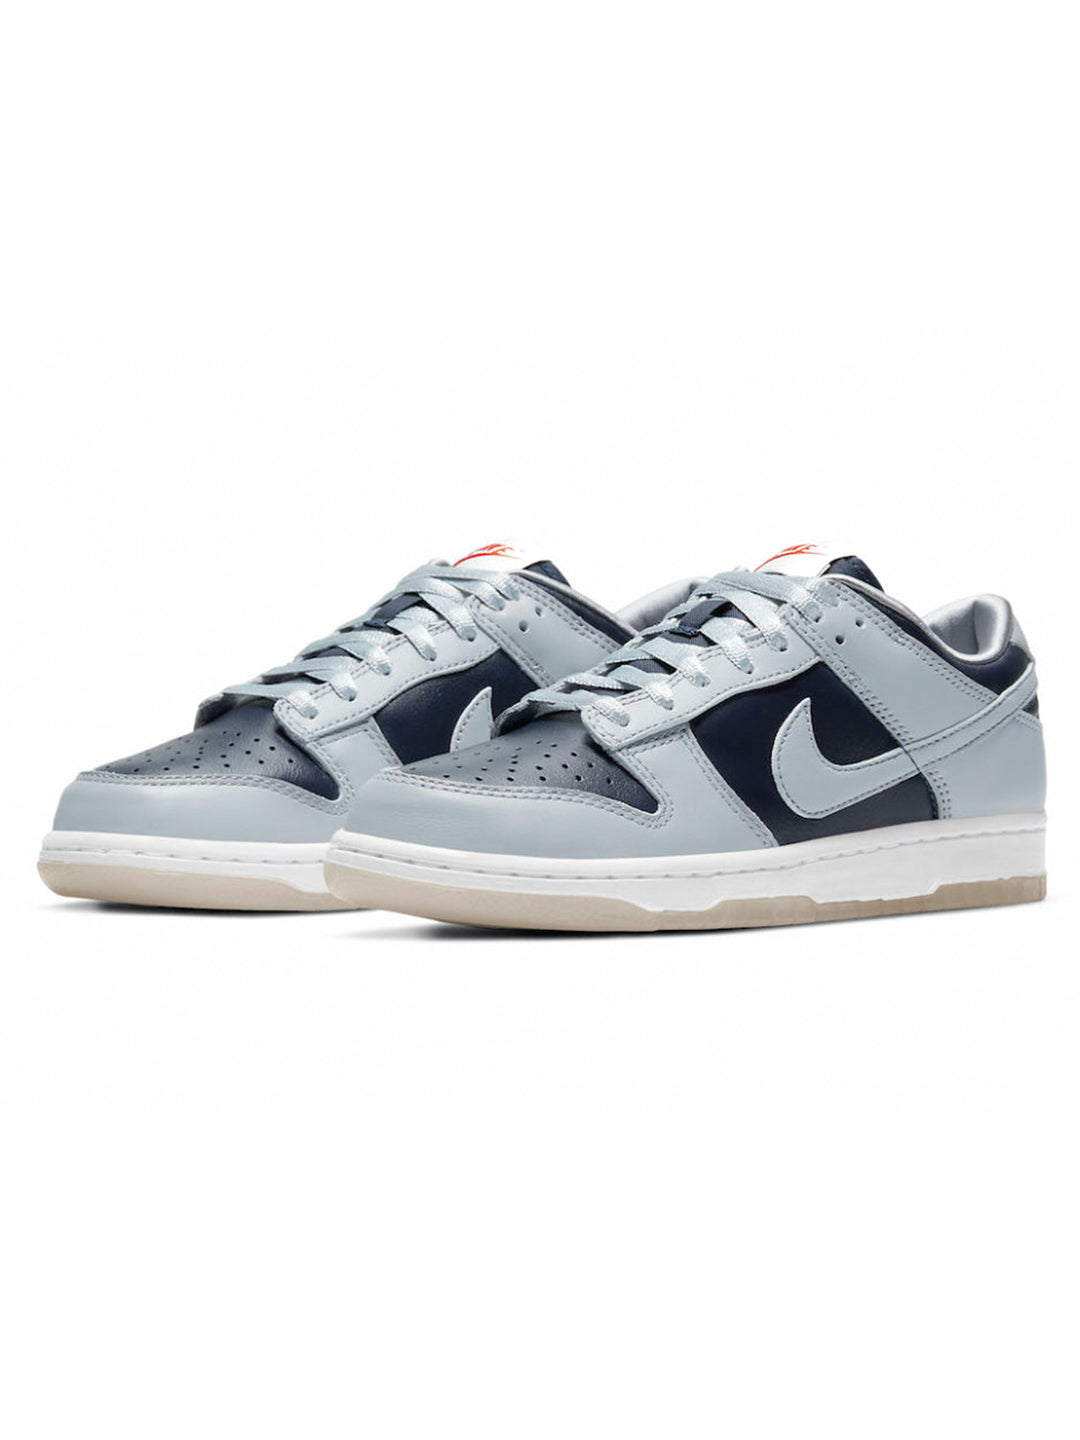 Nike Dunk Low College Navy Grey [W] Prior